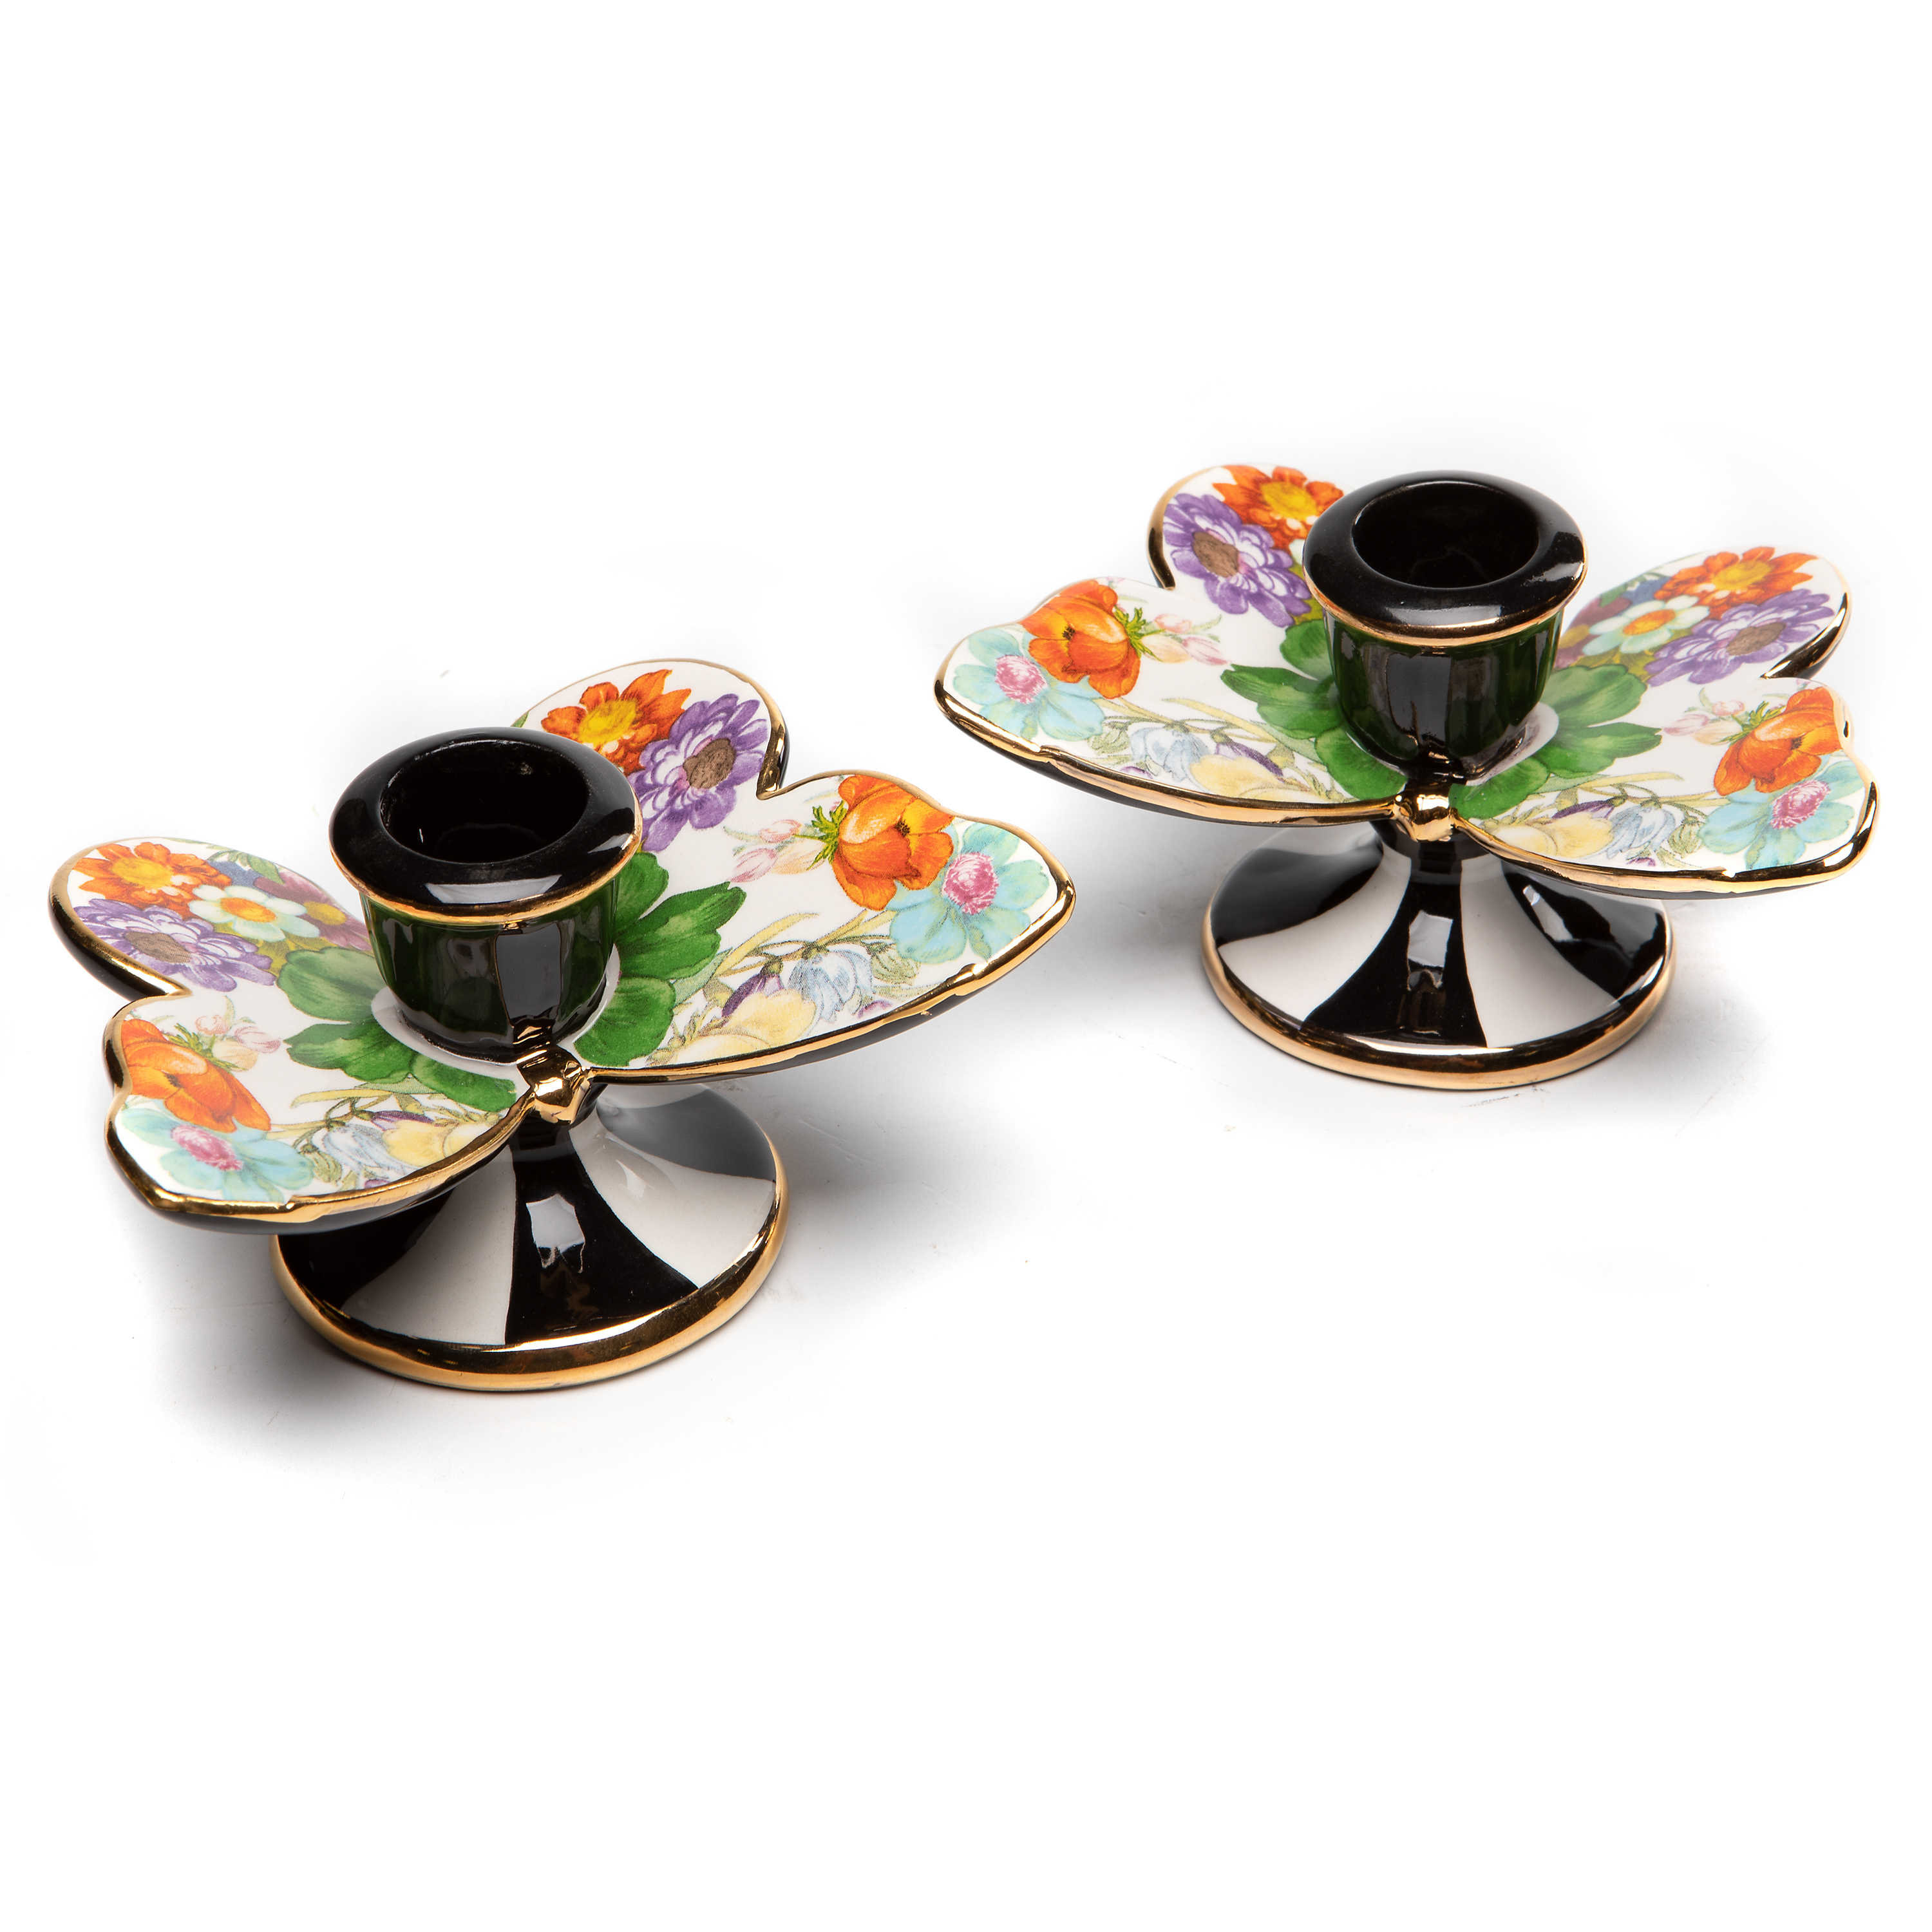 Flower Market Butterfly Candle Holders, Set of 2 mackenzie-childs Panama 0